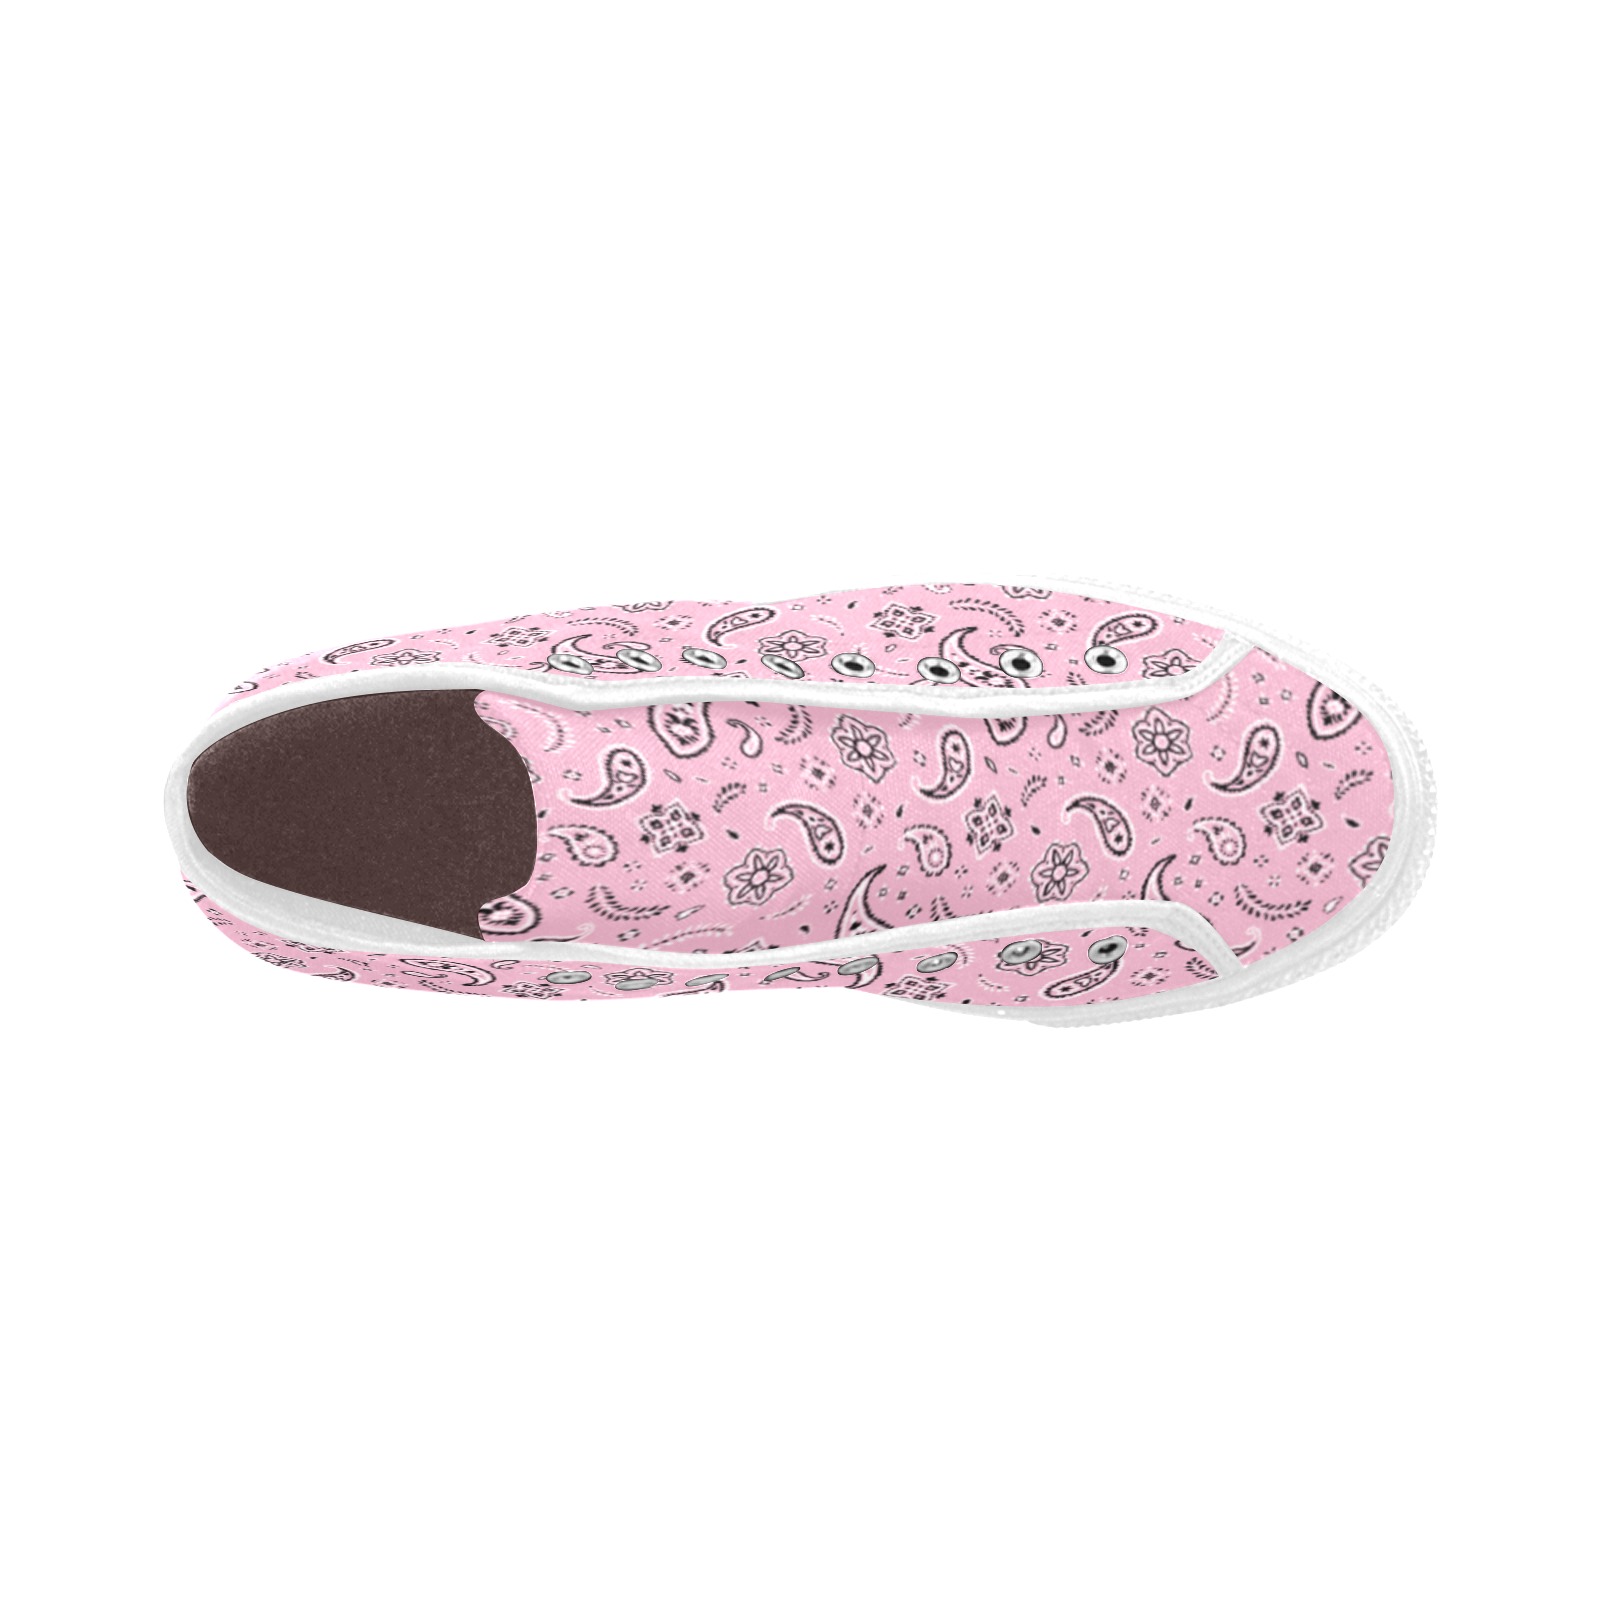 Pretty In Pink Vancouver H Women's Canvas Shoes (1013-1)